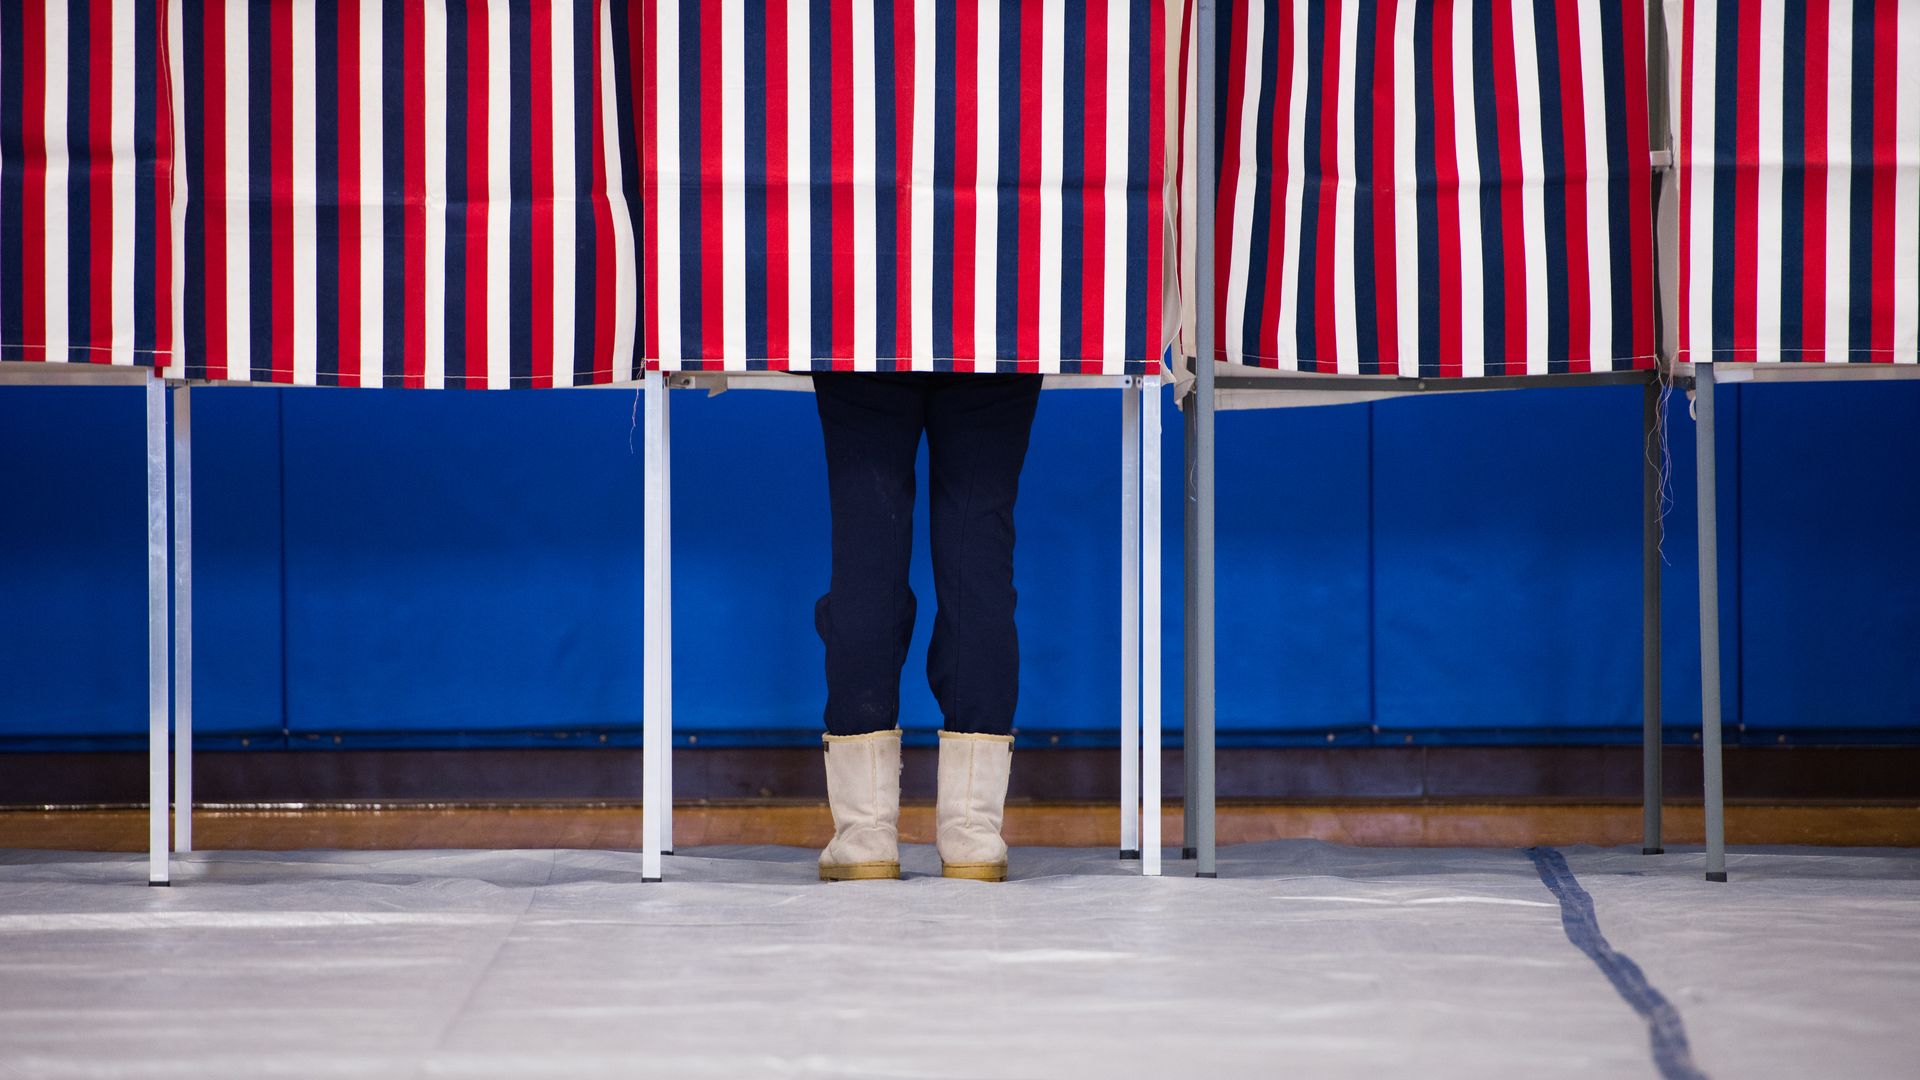 Person's feet visible while voting behind polling booth with red white and blue curtains